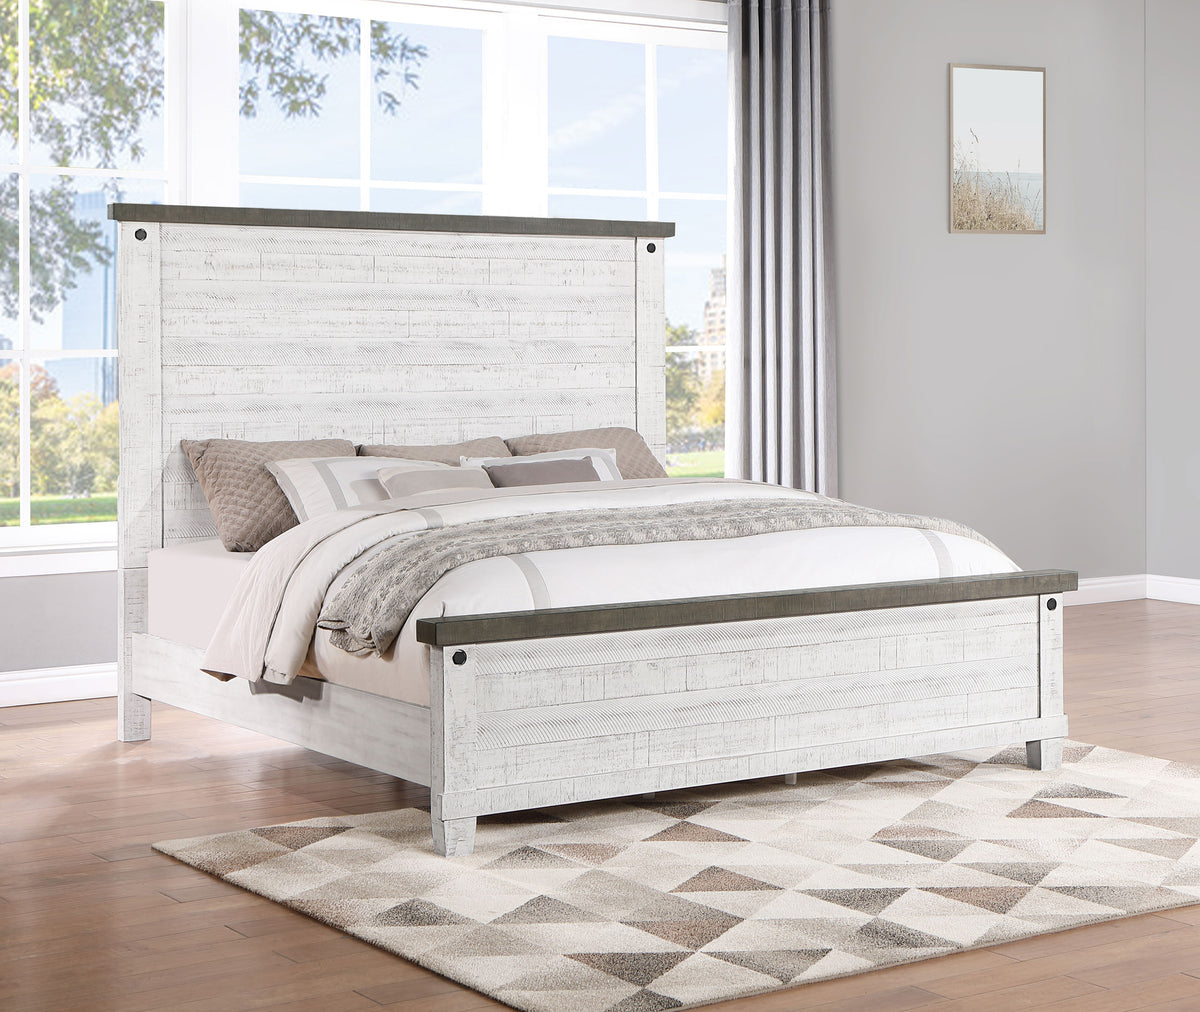 Lilith Panel Bed Distressed Grey and White Lilith Panel Bed Distressed Grey and White Half Price Furniture